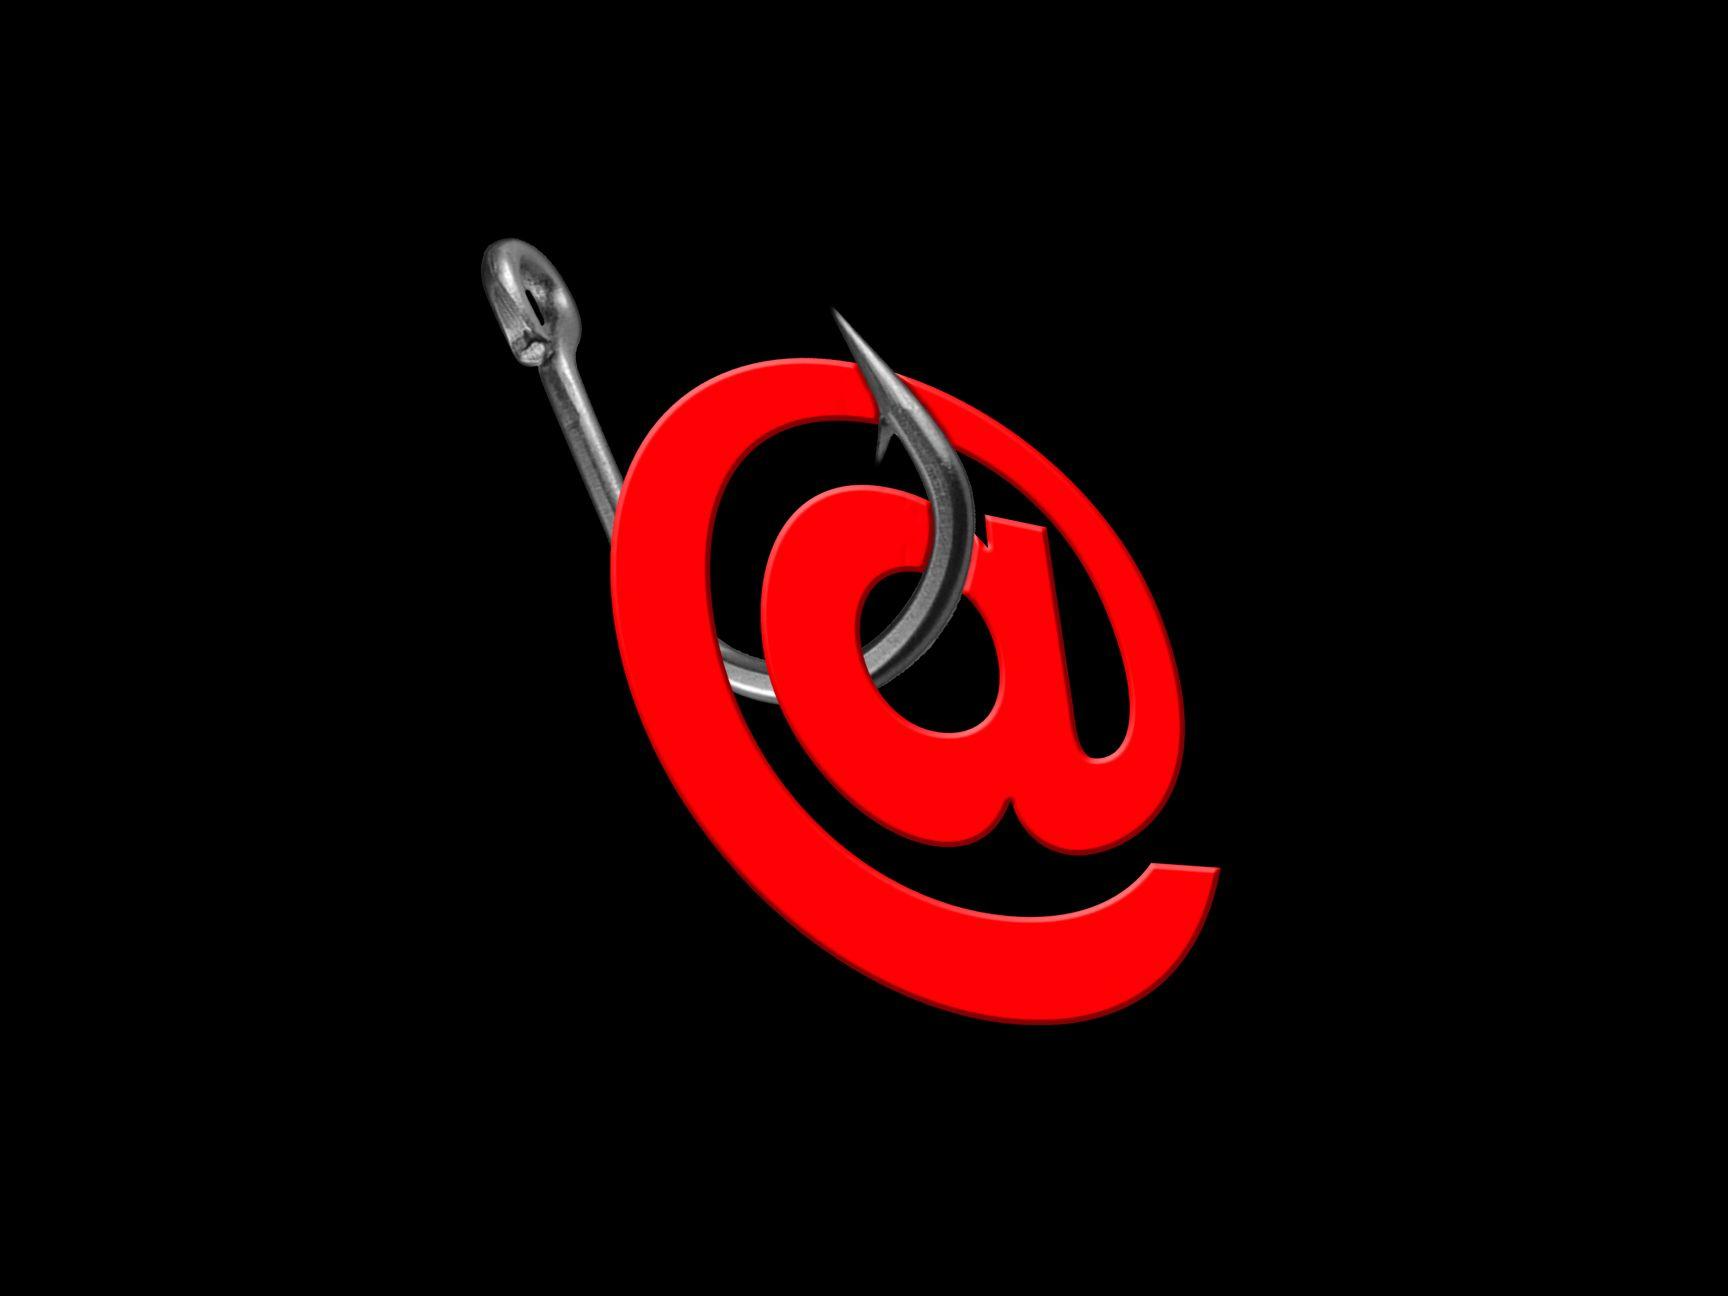 Wallpaper Download Frenzy Email Phishing